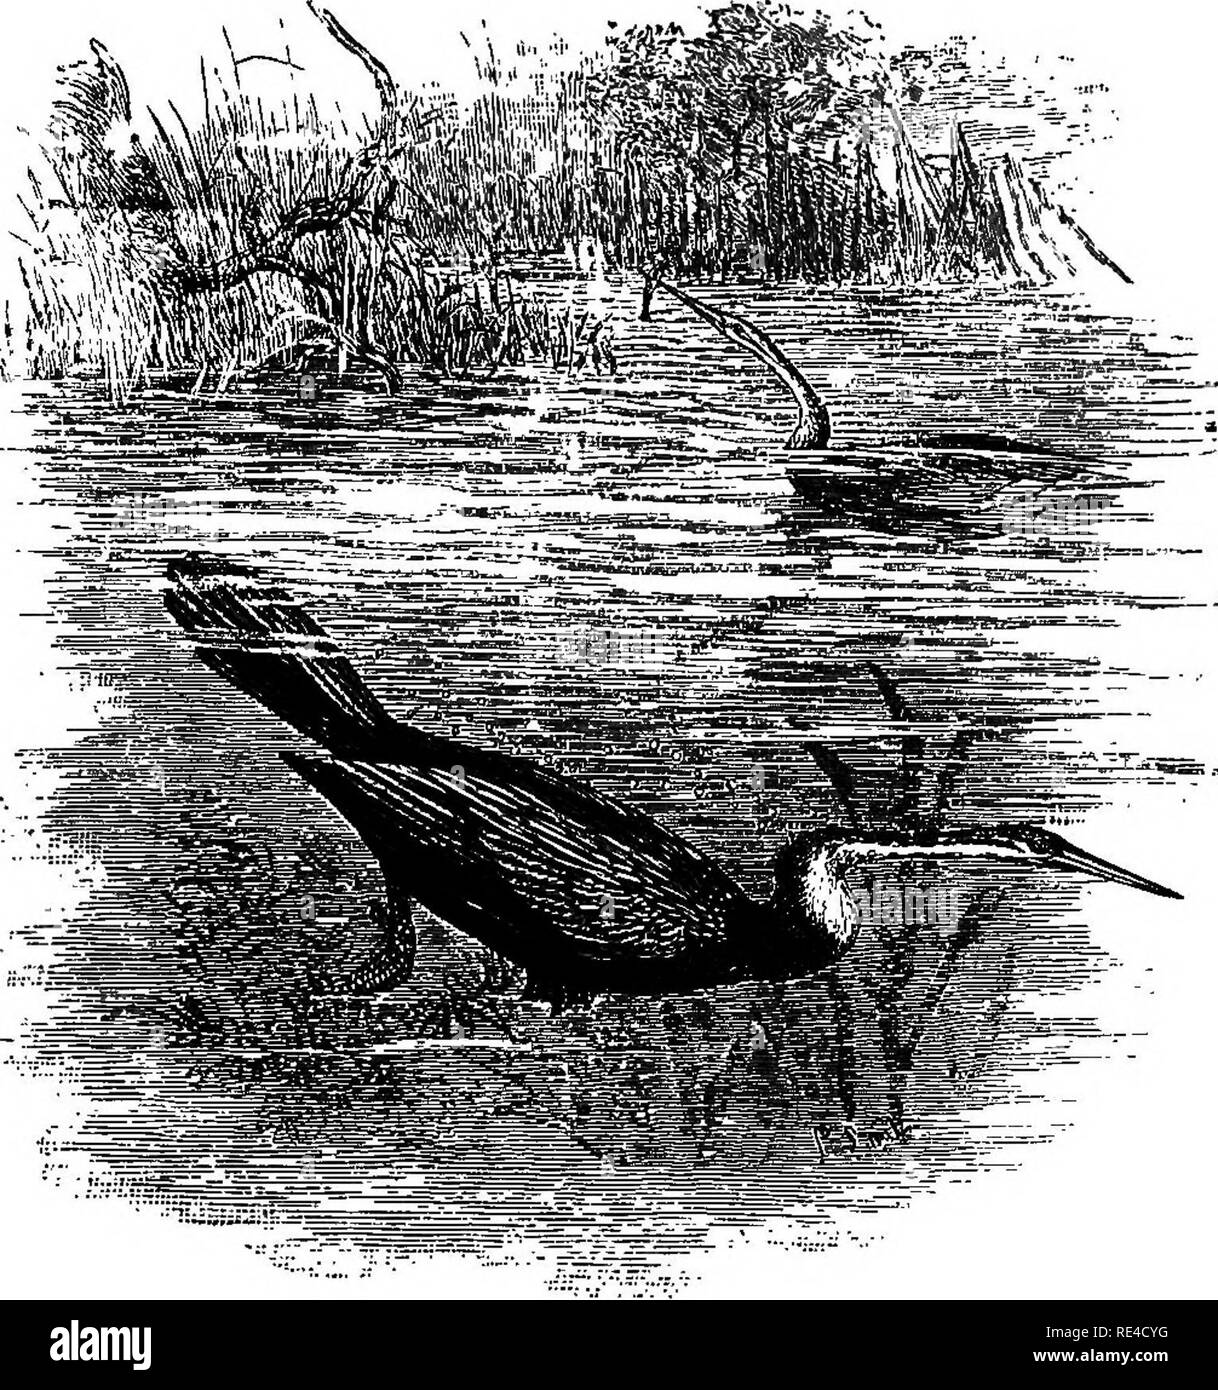 . Birds. Birds. phaia.cbocoeacid;e. 339. Fig. 78.âPlotus melanogaster. Family PHALACROCOEACID.E. The Cormorants and Darters are diving fishers with black or blackish plumage on the upper parts, and very often on the lower also. They have a longish neck, a somewhat slender and elongate bill, and stiff tail-feathers. The nostrils are small and not per- vious. Cervical vertebrae 20. Ambiens, femoro-caudal, and semi- tendinosus muscles present, the two accessory thigh-muscles â wanting. Syringeal muscles present. There are two subfamilies thus distinguished; each contains a single genus:â Bill hoo Stock Photo